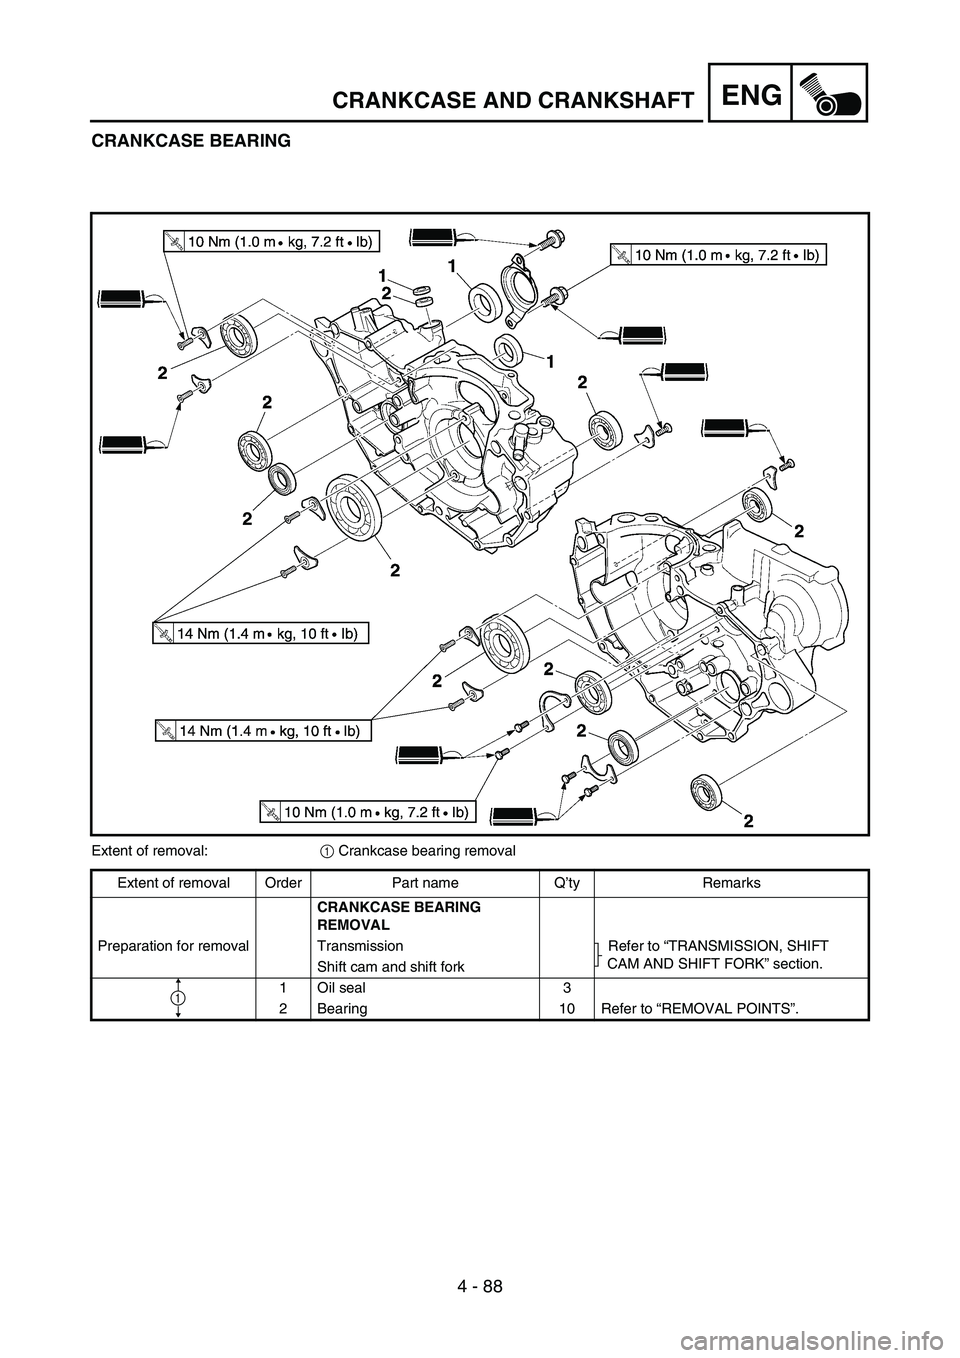 YAMAHA YZ450F 2007  Owners Manual 4 - 88
ENGCRANKCASE AND CRANKSHAFT
CRANKCASE BEARING
Extent of removal:
1 Crankcase bearing removal
Extent of removal Order Part name Q’ty Remarks
CRANKCASE BEARING 
REMOVAL
Preparation for removal 